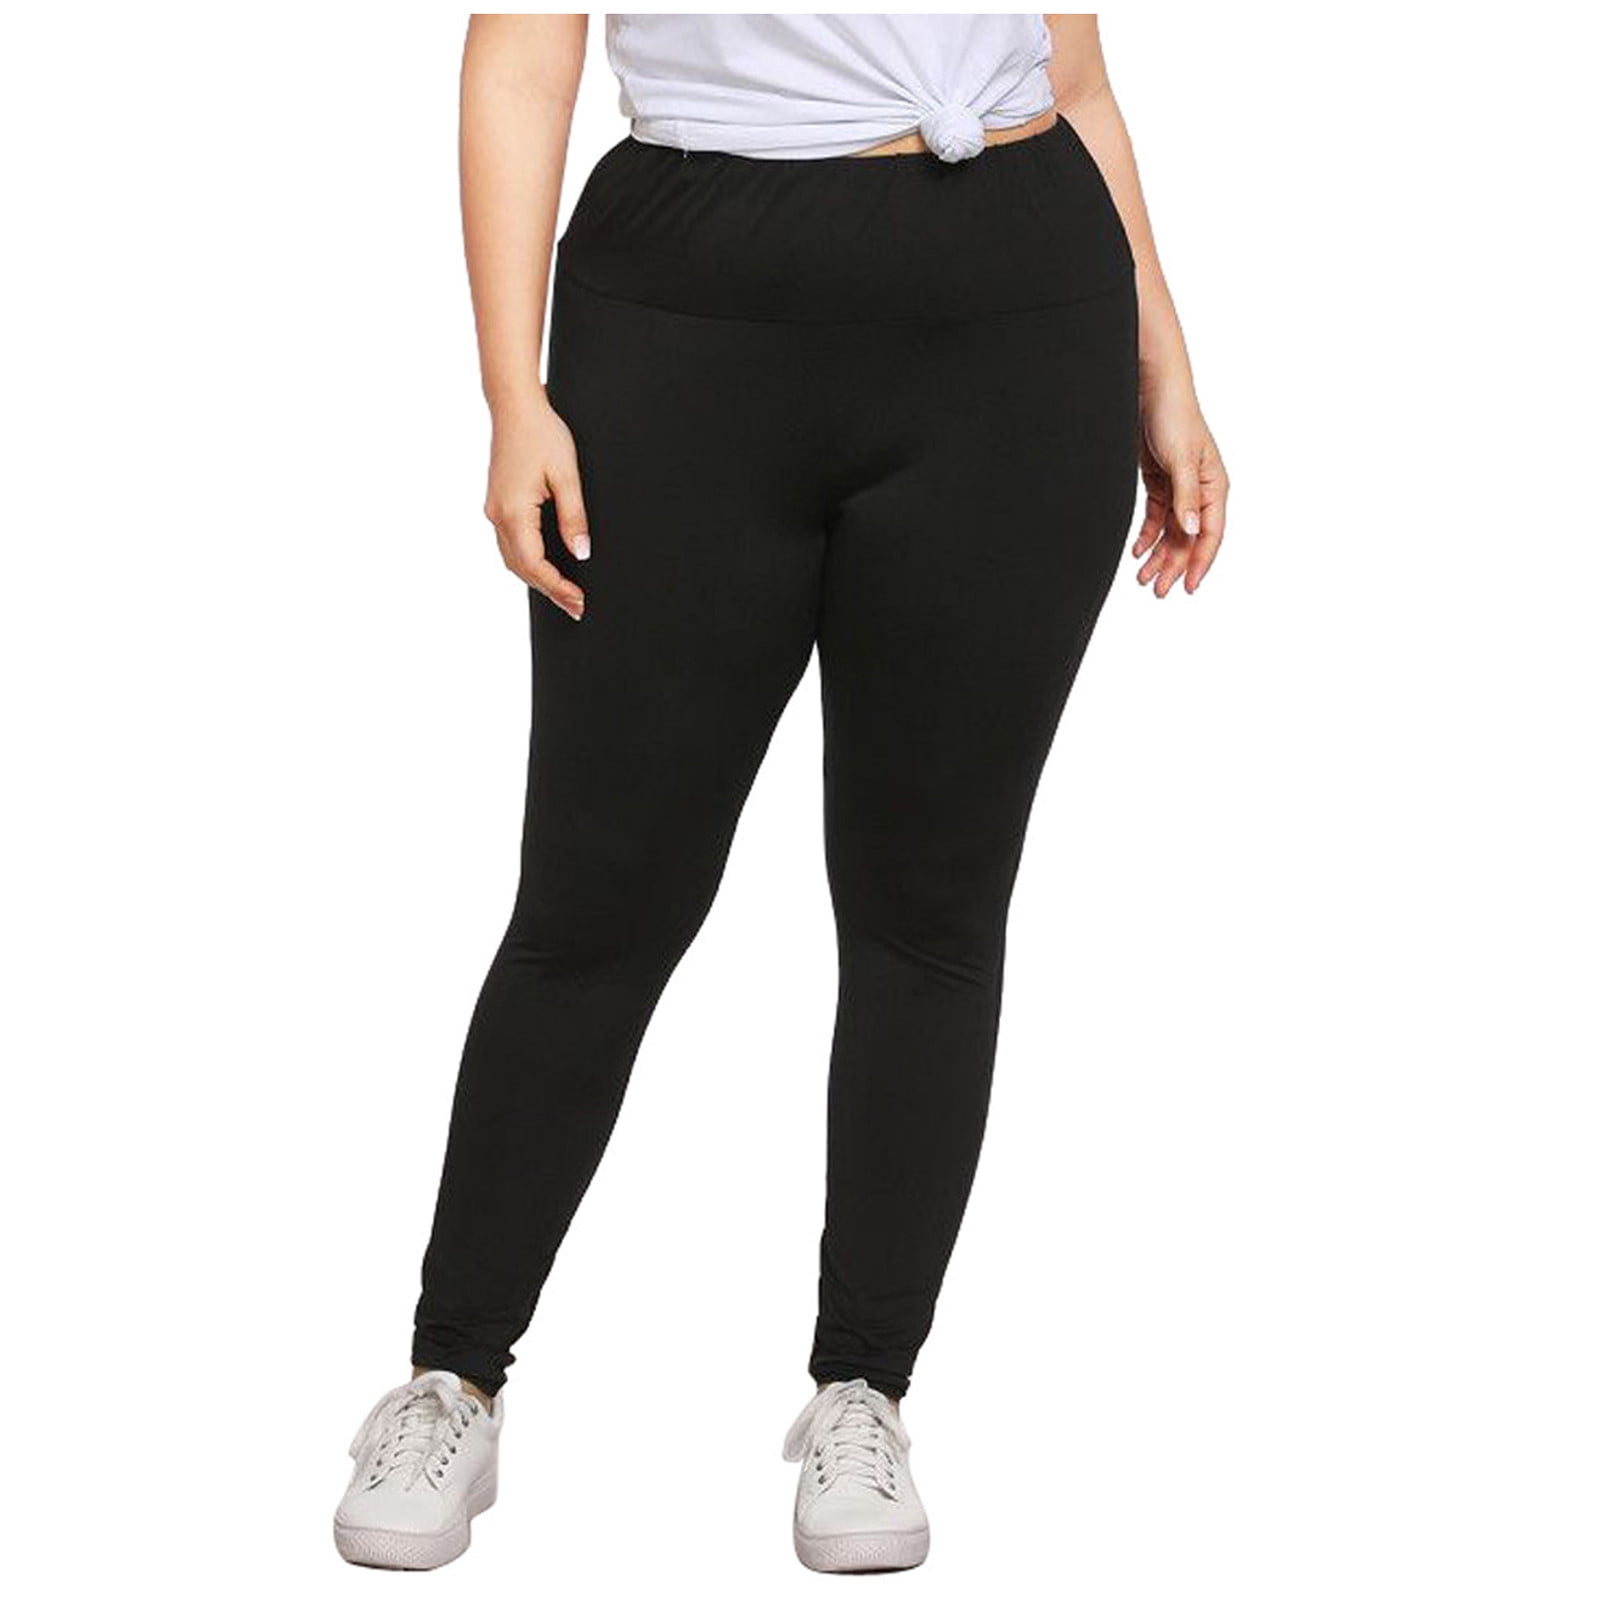 Womens Plus Size High Waisted Yoga Leggings Stretch Athletic Tummy Control  Workout Casual Skinny Pants Trousers 2X-5XL 